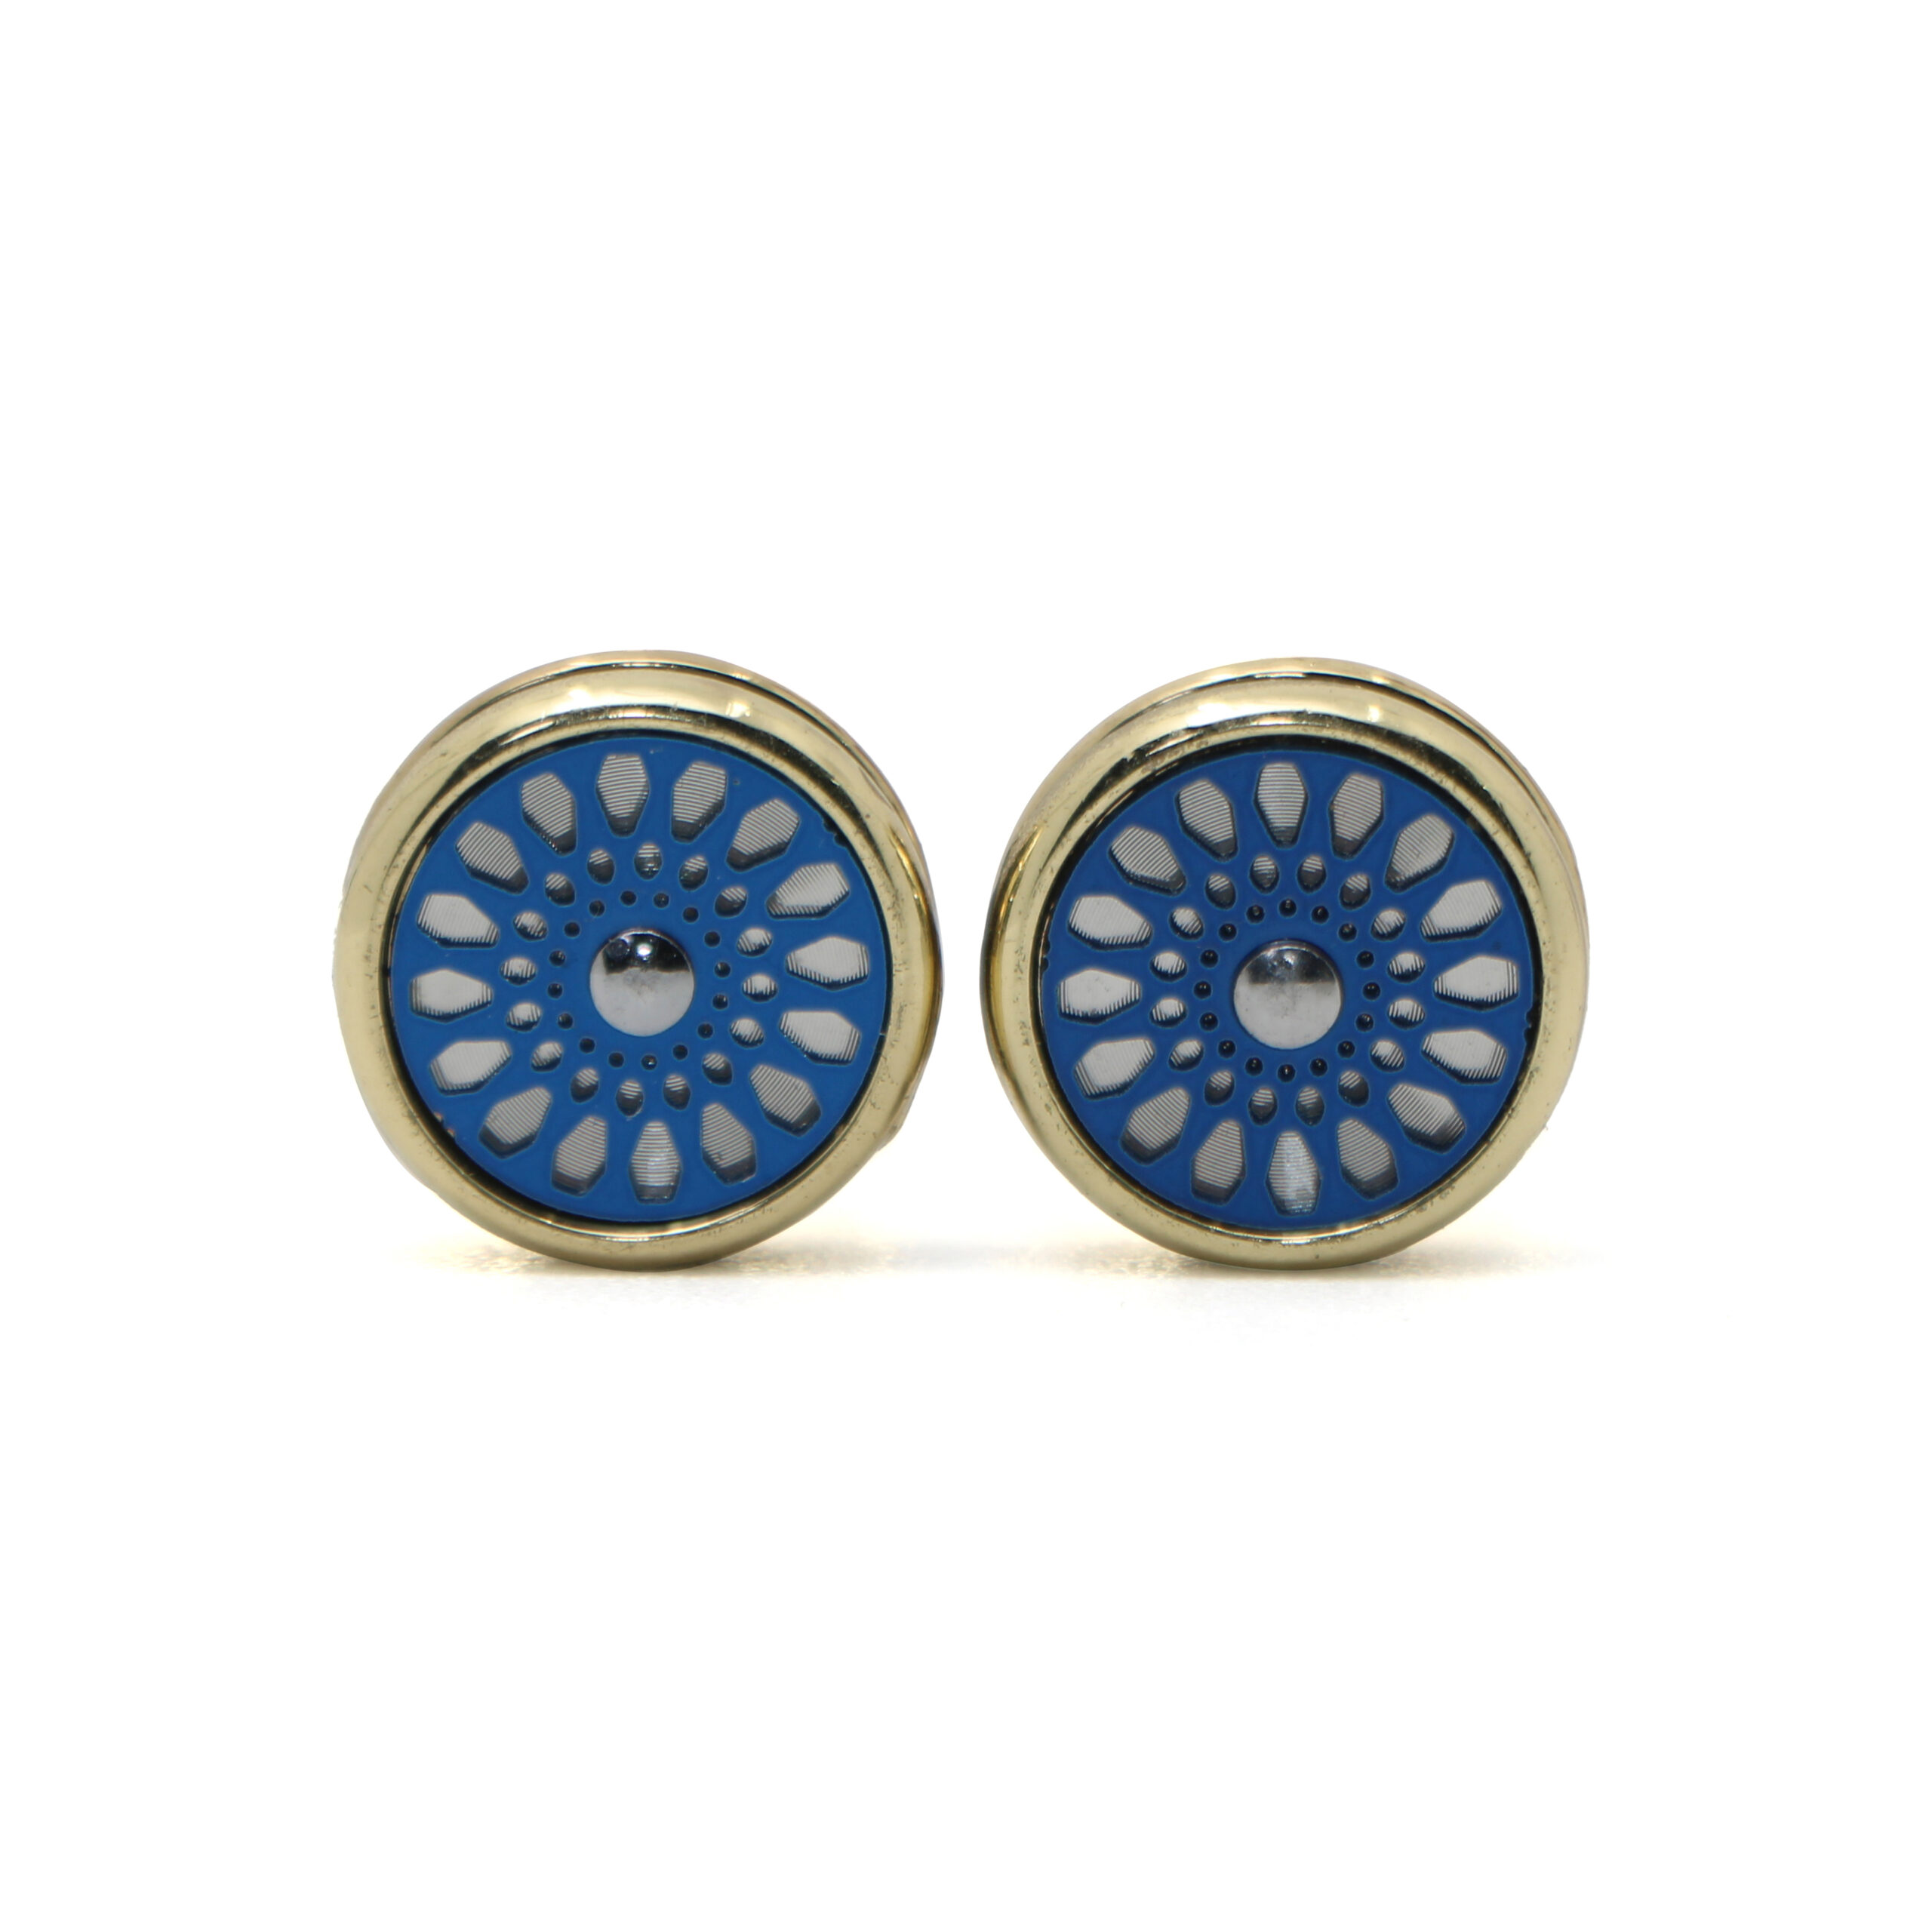 Cufflers Novelty Silver Cufflinks with Free Gift Box – Stylish Round Design with Mid Blue Flower – CU-2013